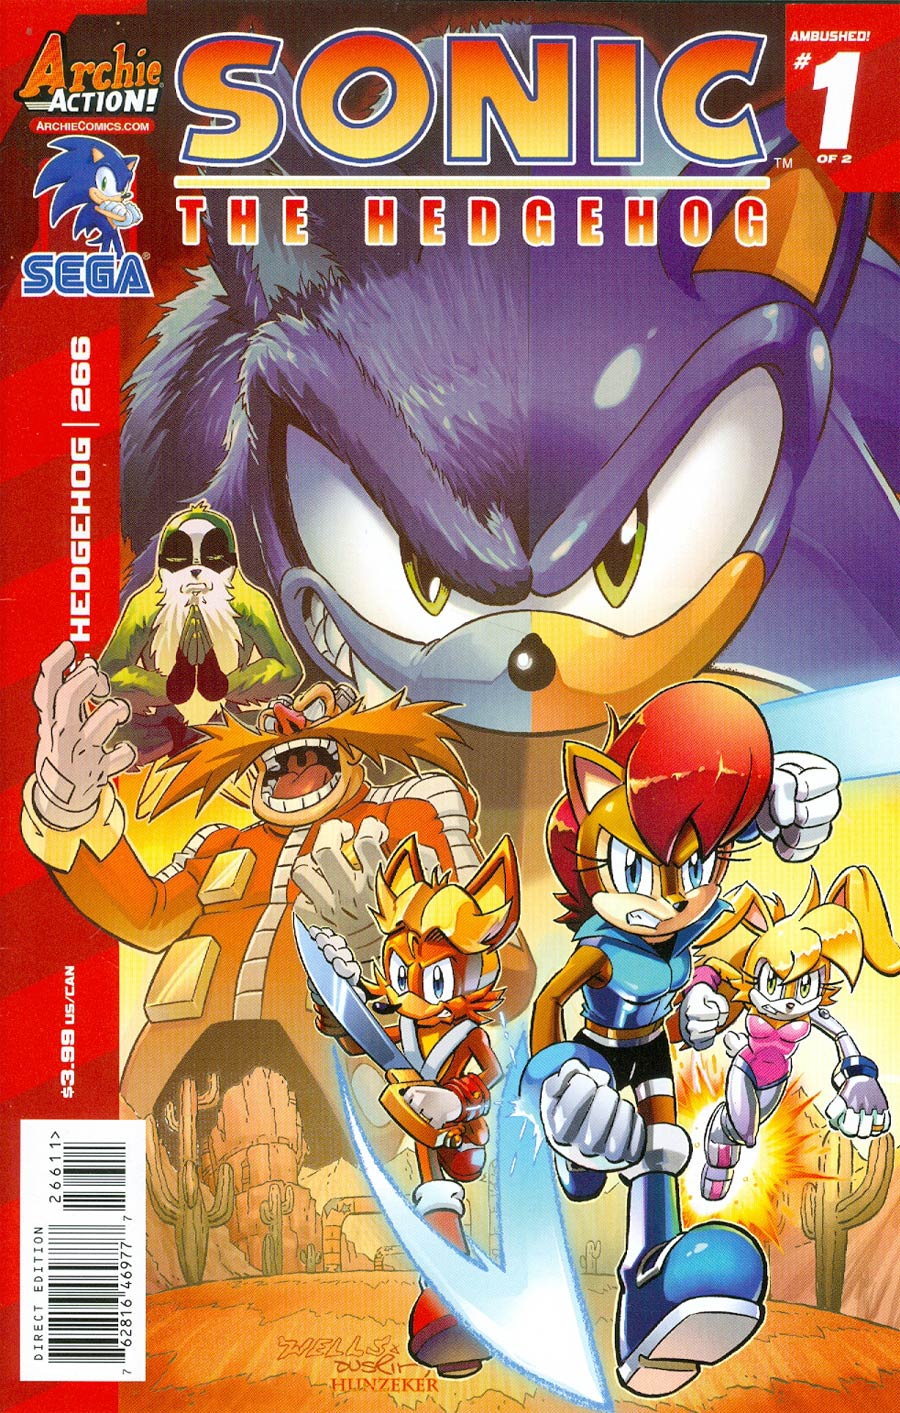 Sonic The Hedgehog Vol 2 #266 Cover A Regular Tracy Yardley Cover